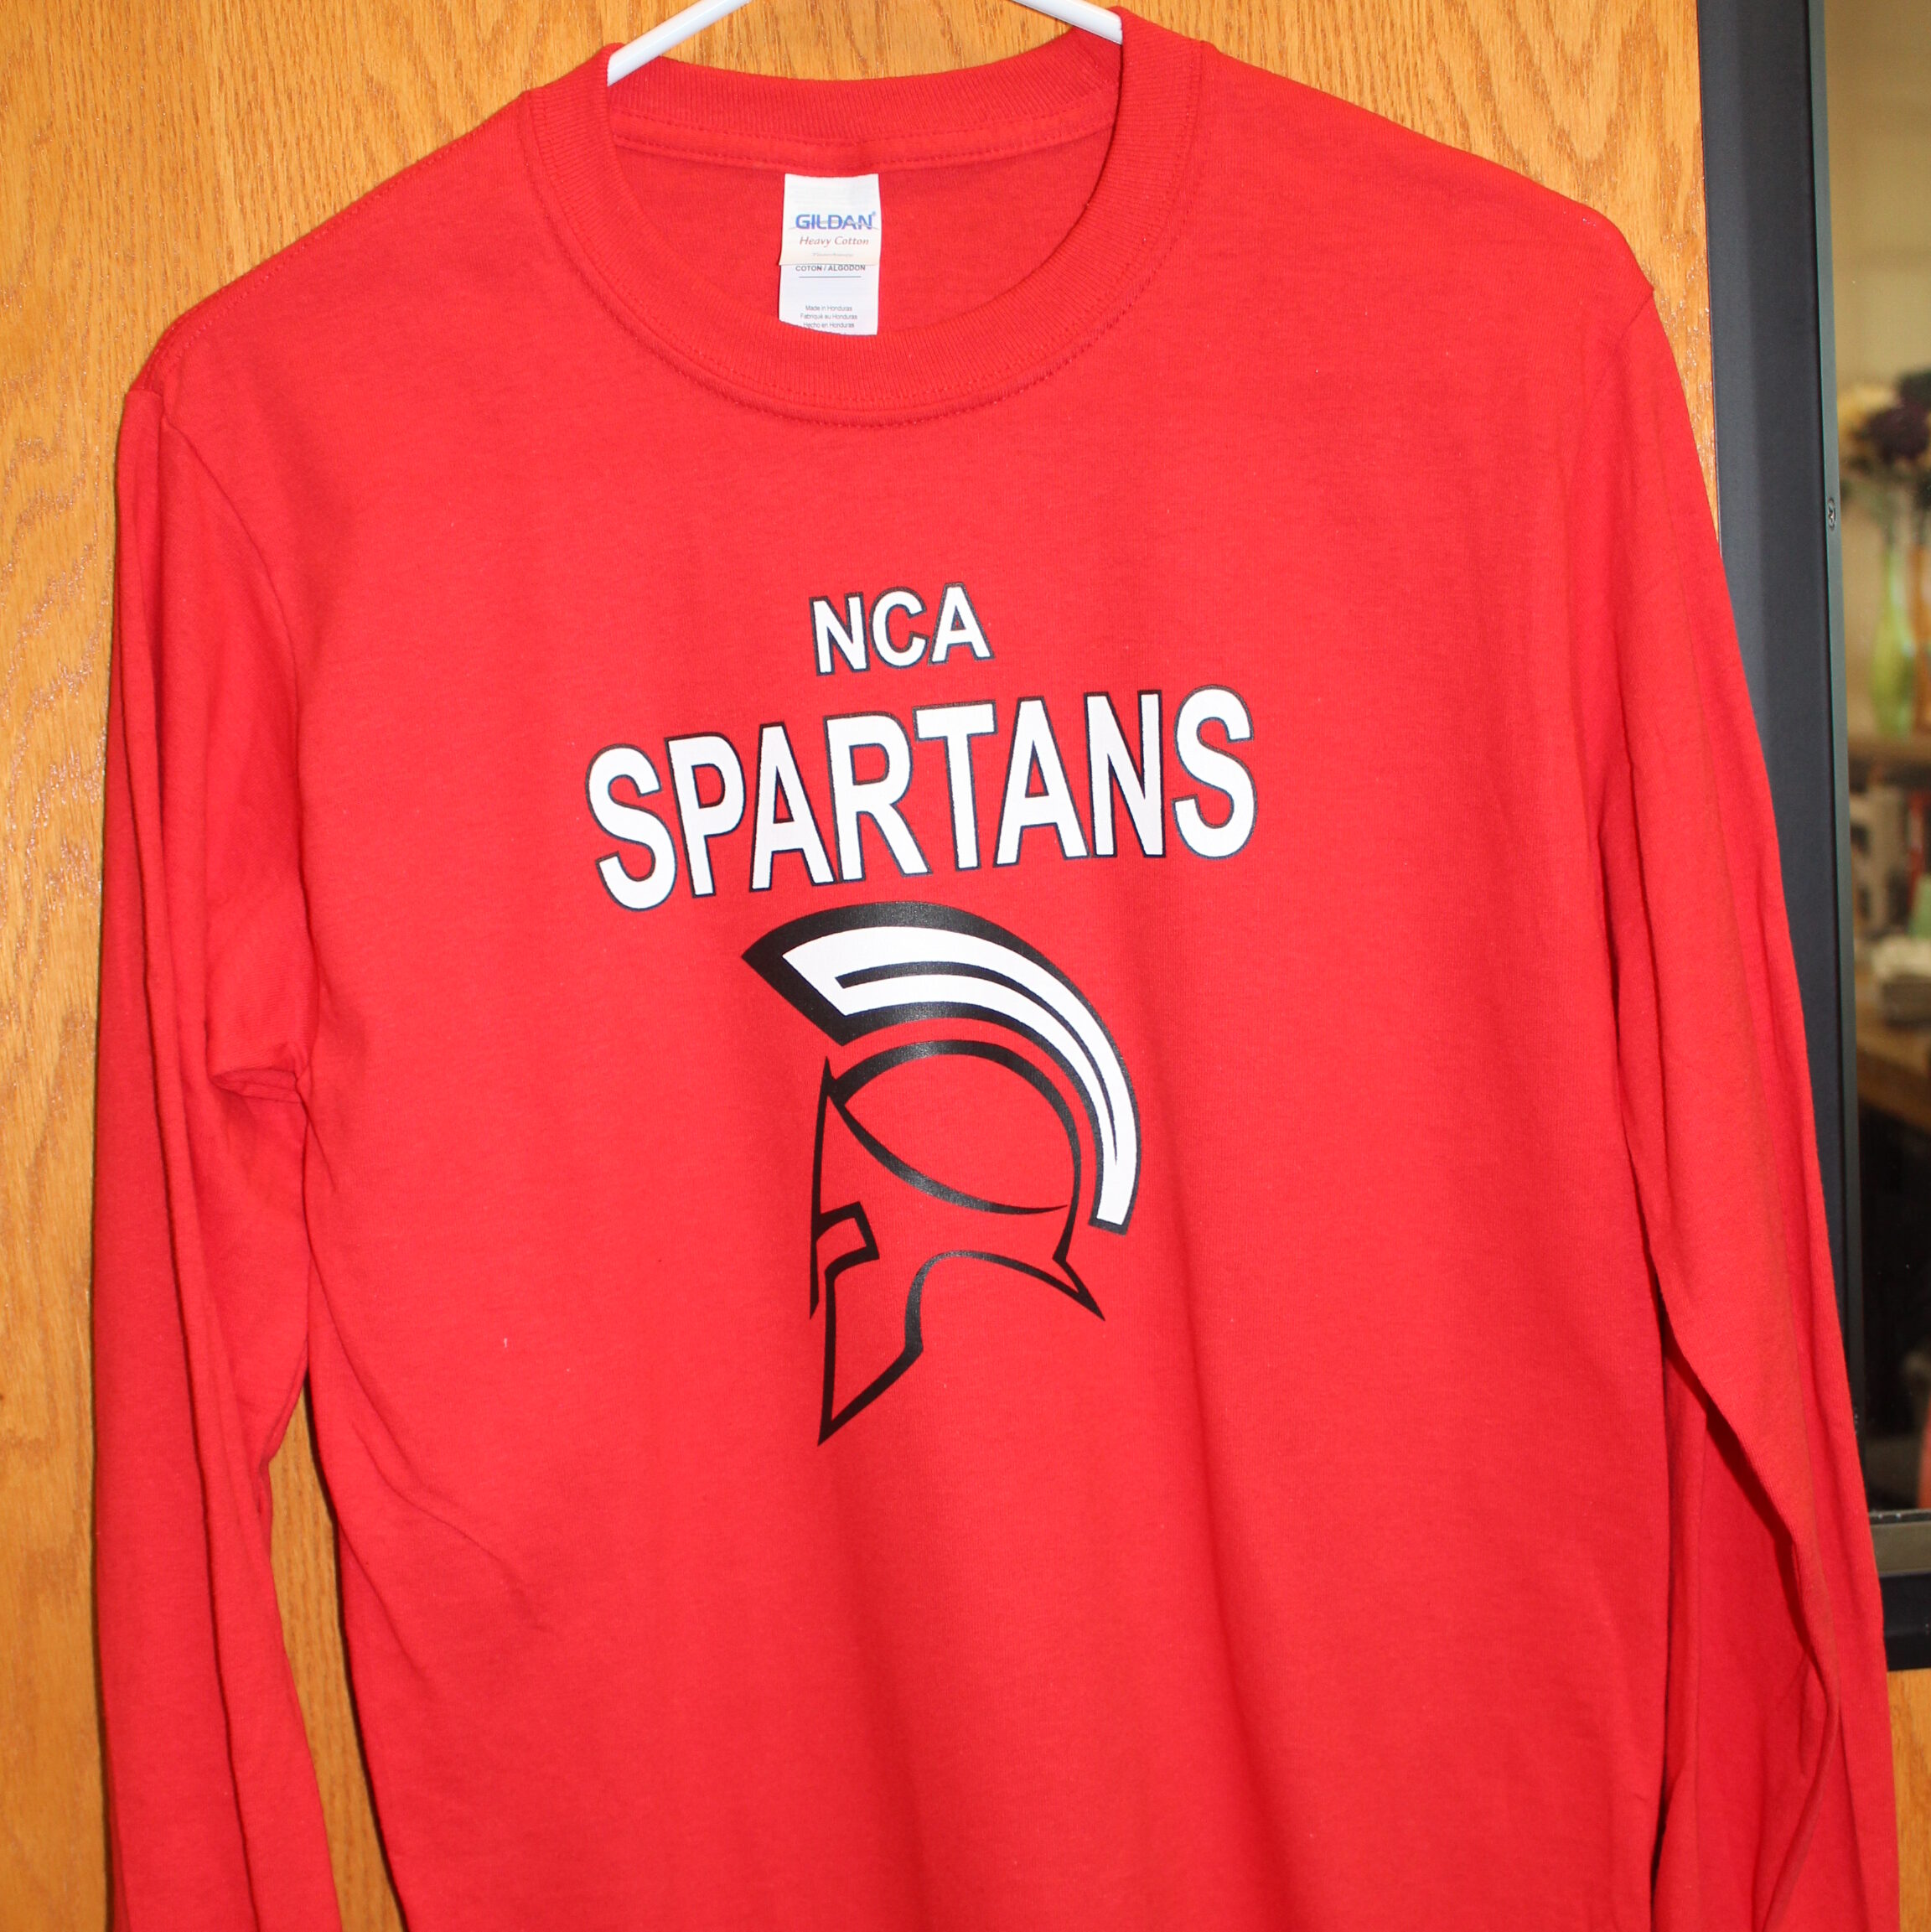 Red long sleeve t-shirt with the New Century Academy logo on it